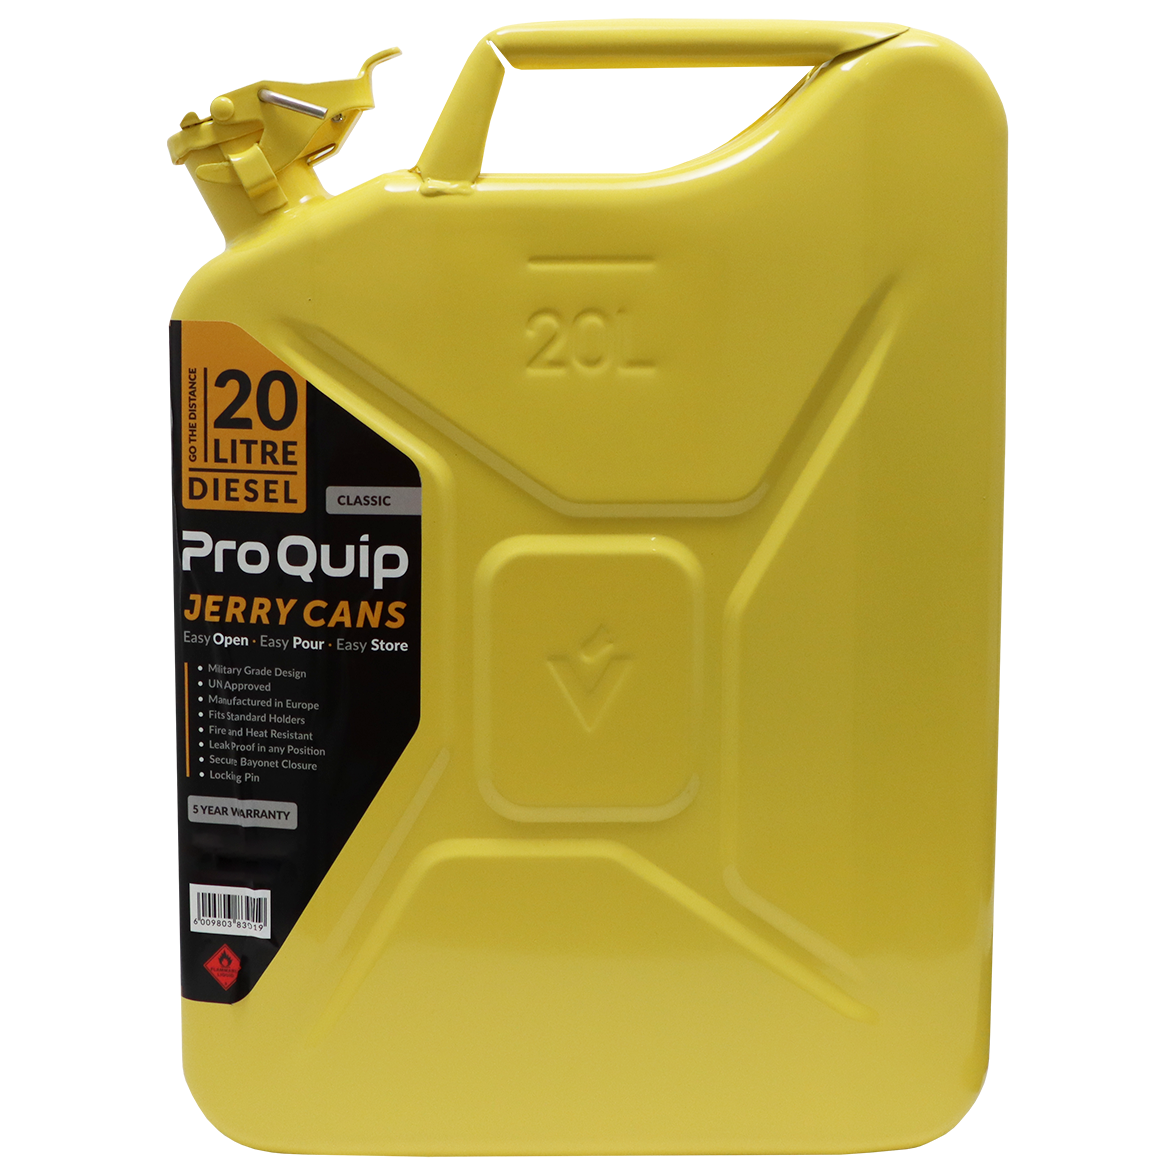 JERRY CAN METAL 20L YELLOW DIESEL - NO SPOUT NATO COMPLIANT